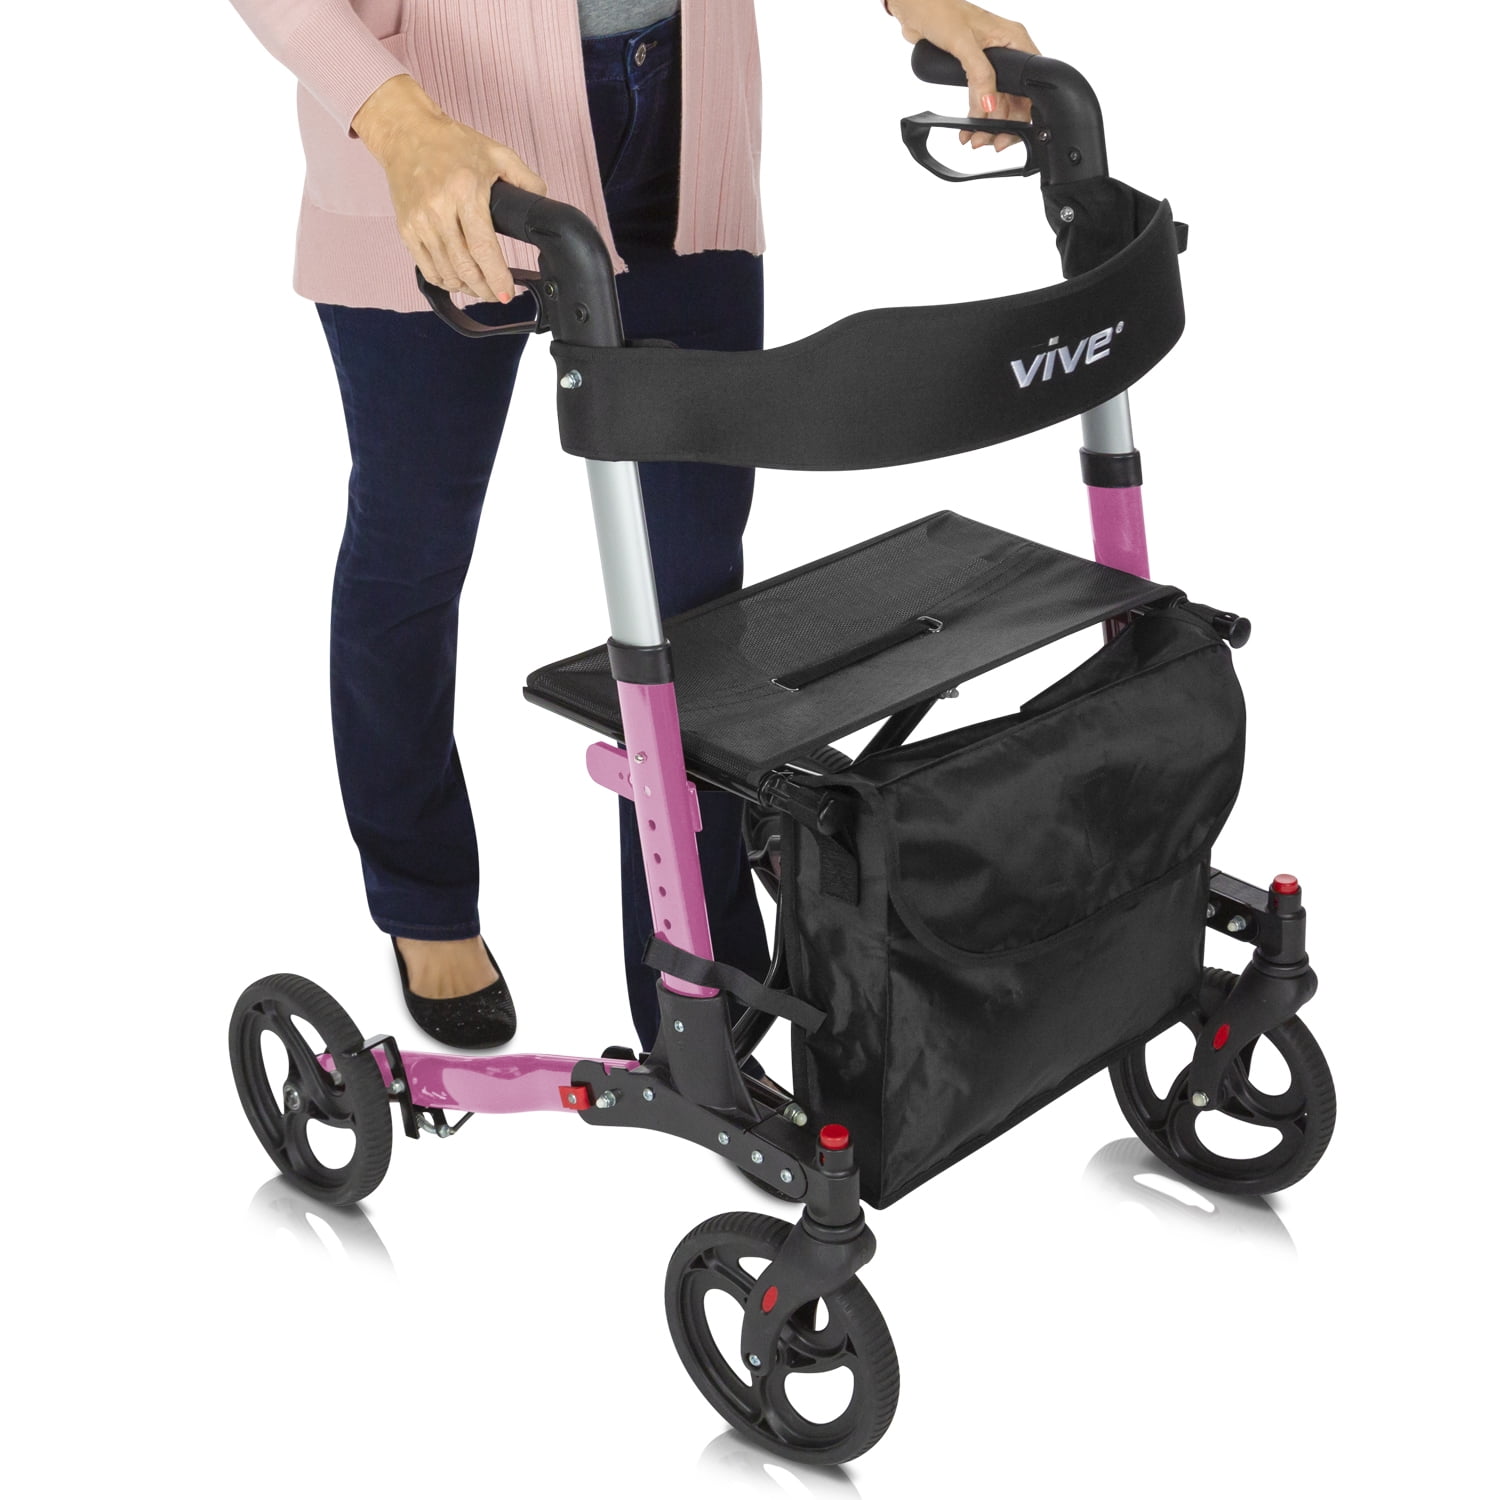 Vive Folding Rollator Walker - 4 Wheel Medical Rolling Walker with Seat & Bag - Mobility Aid for ...